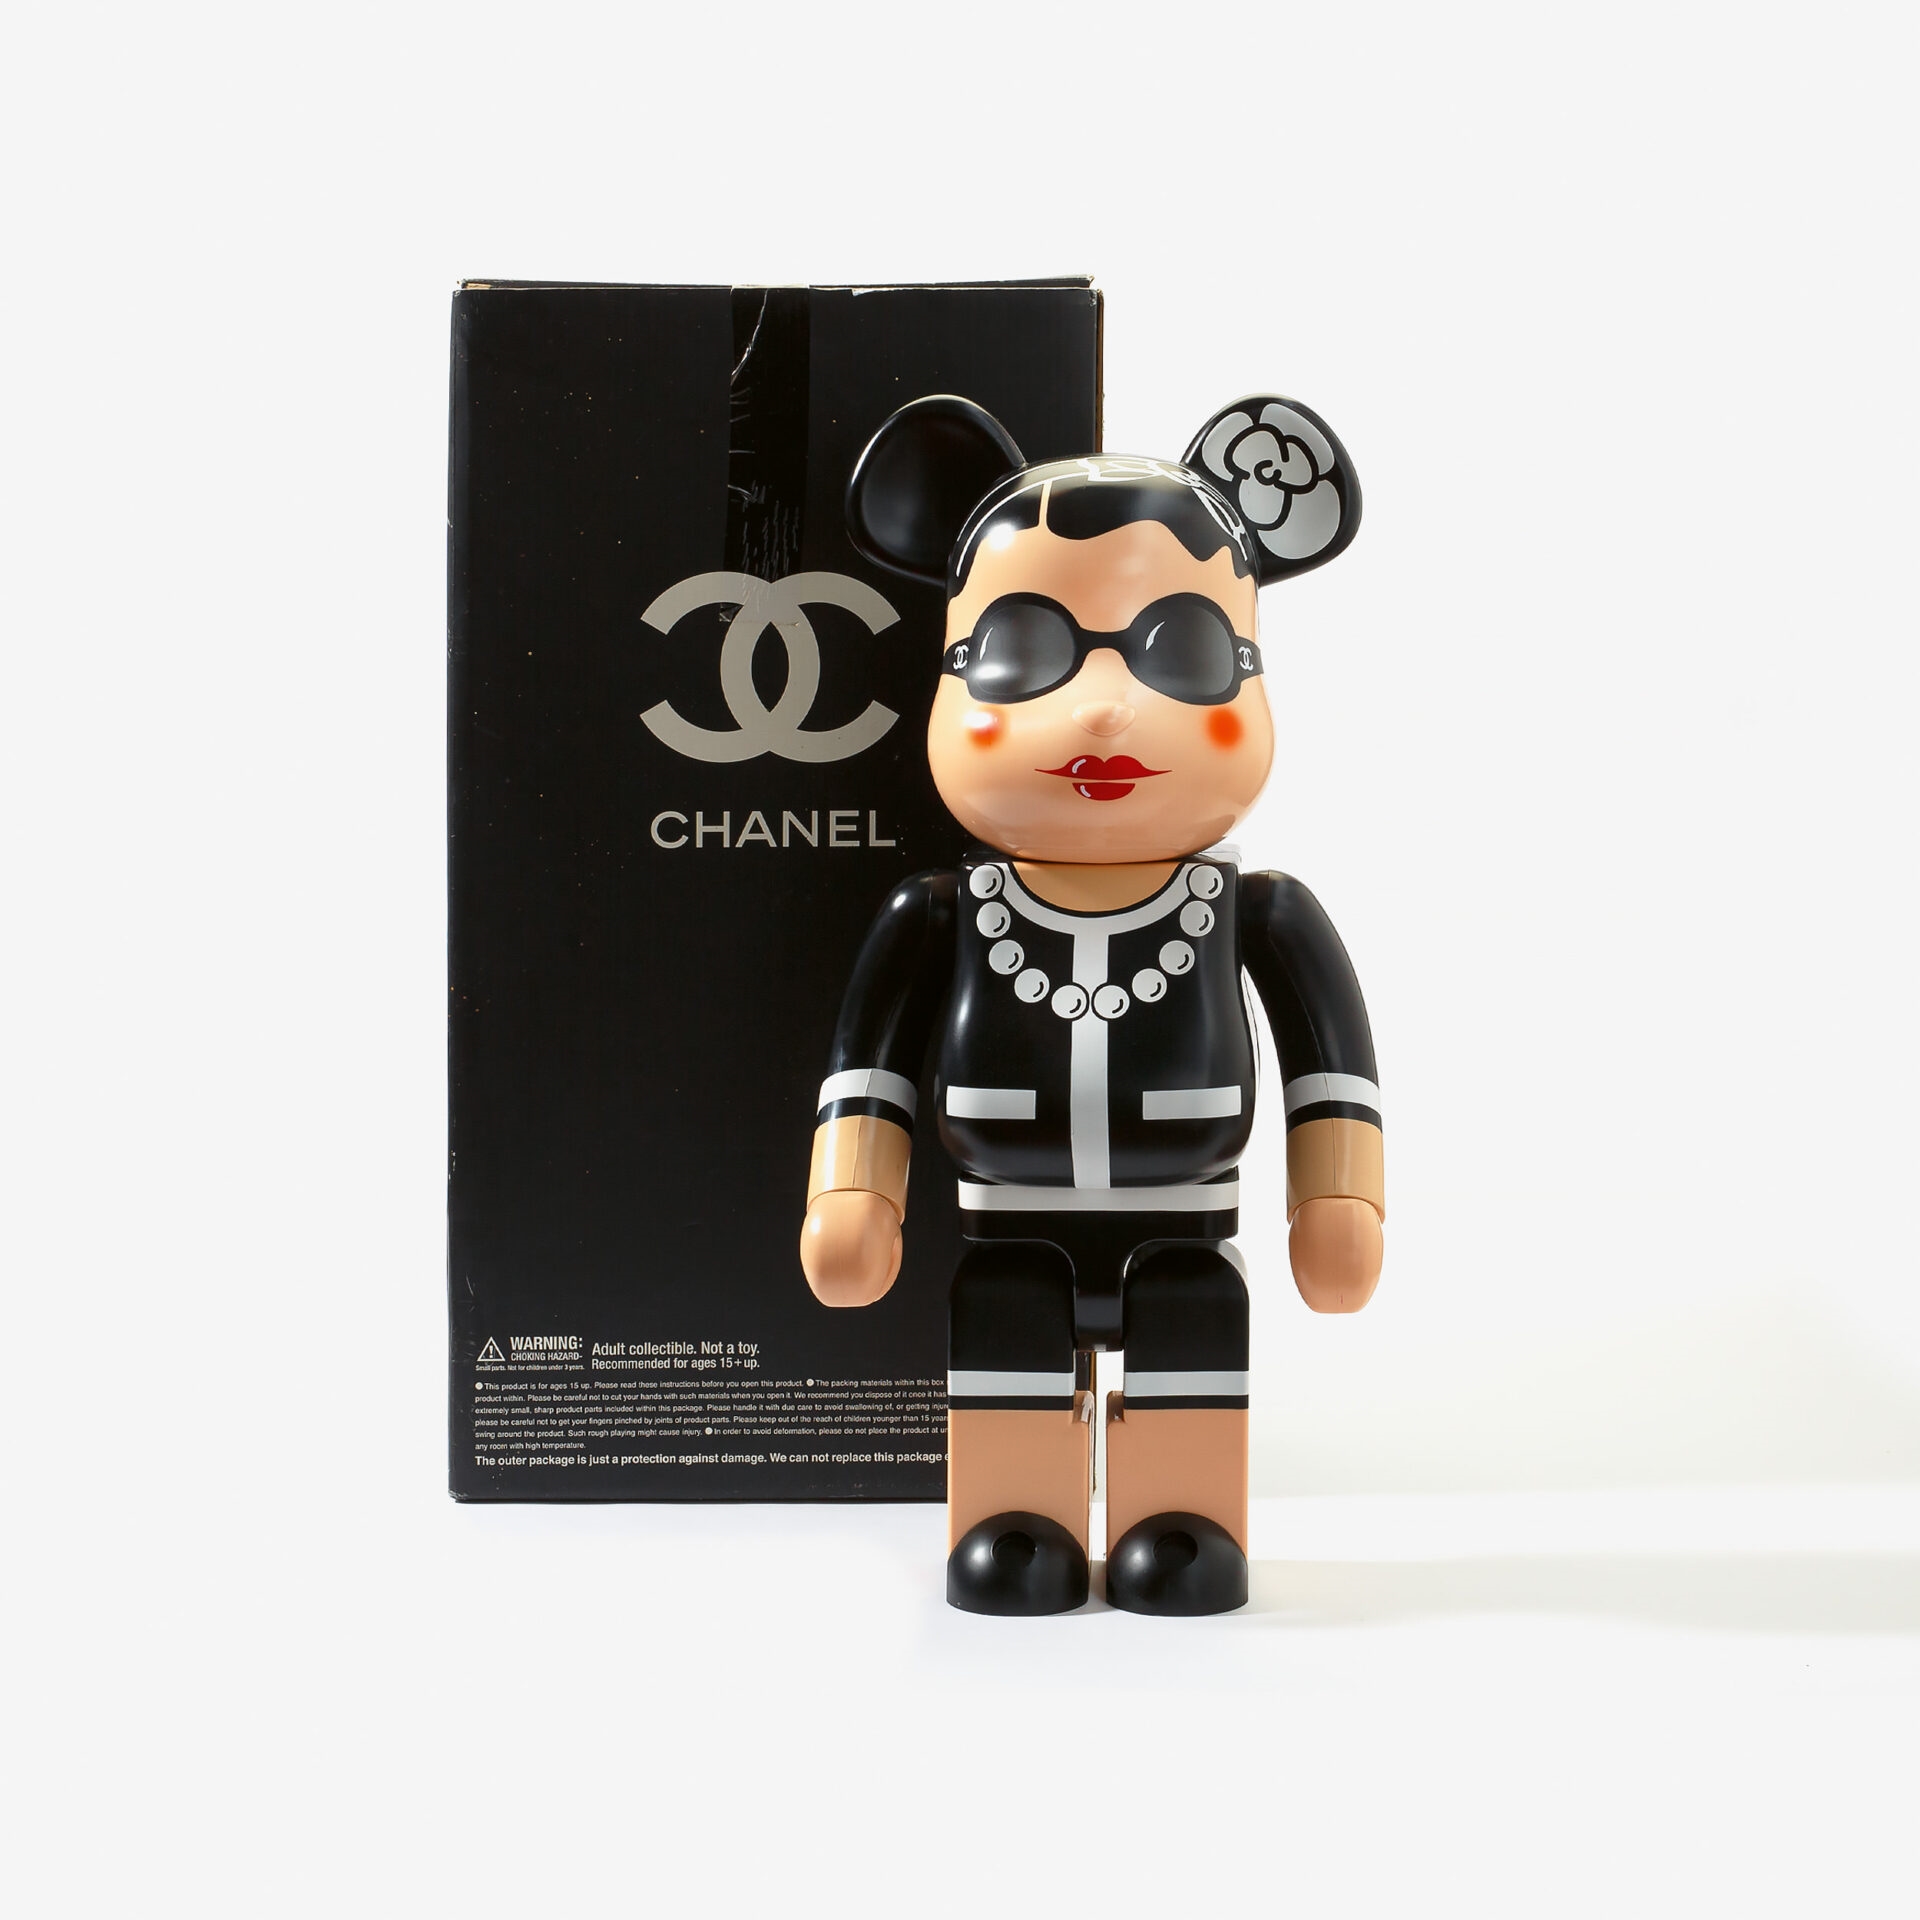 Medicom Toy, The Bearbrick dressed by Karl Lagerfeld for Chanel (2006)